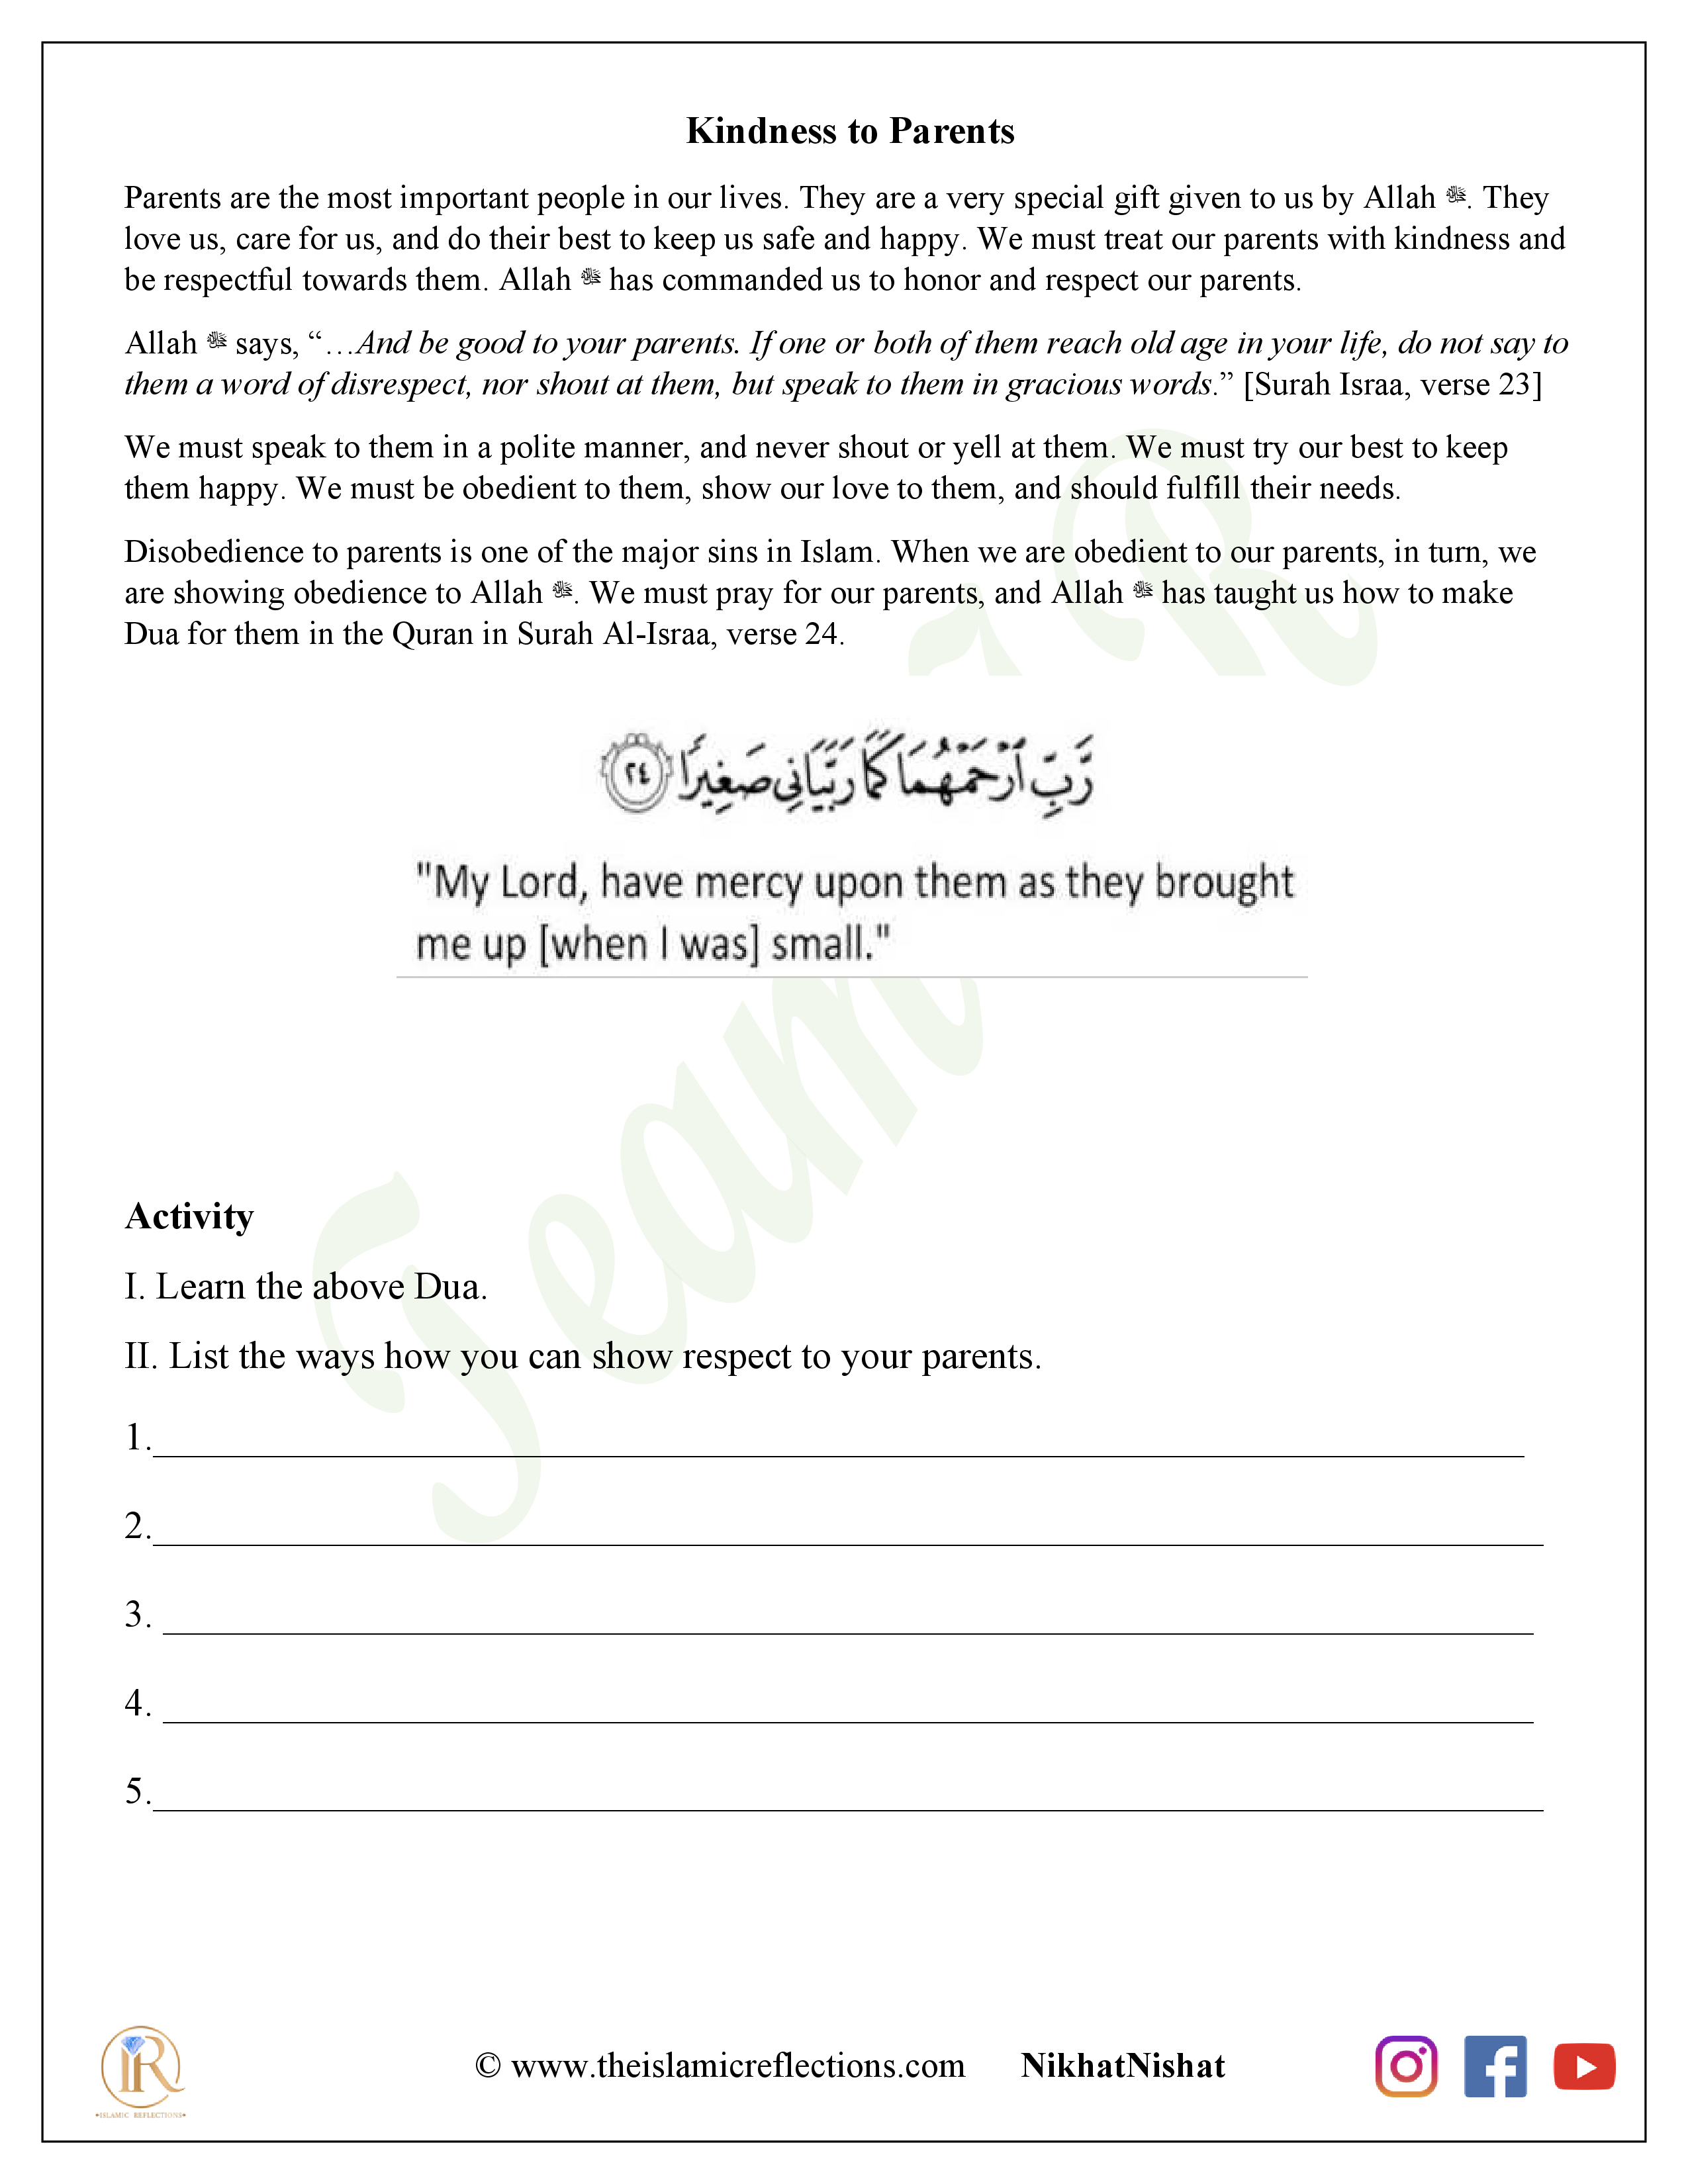 Worksheets Age (5-7) Archives - Islamic Reflections